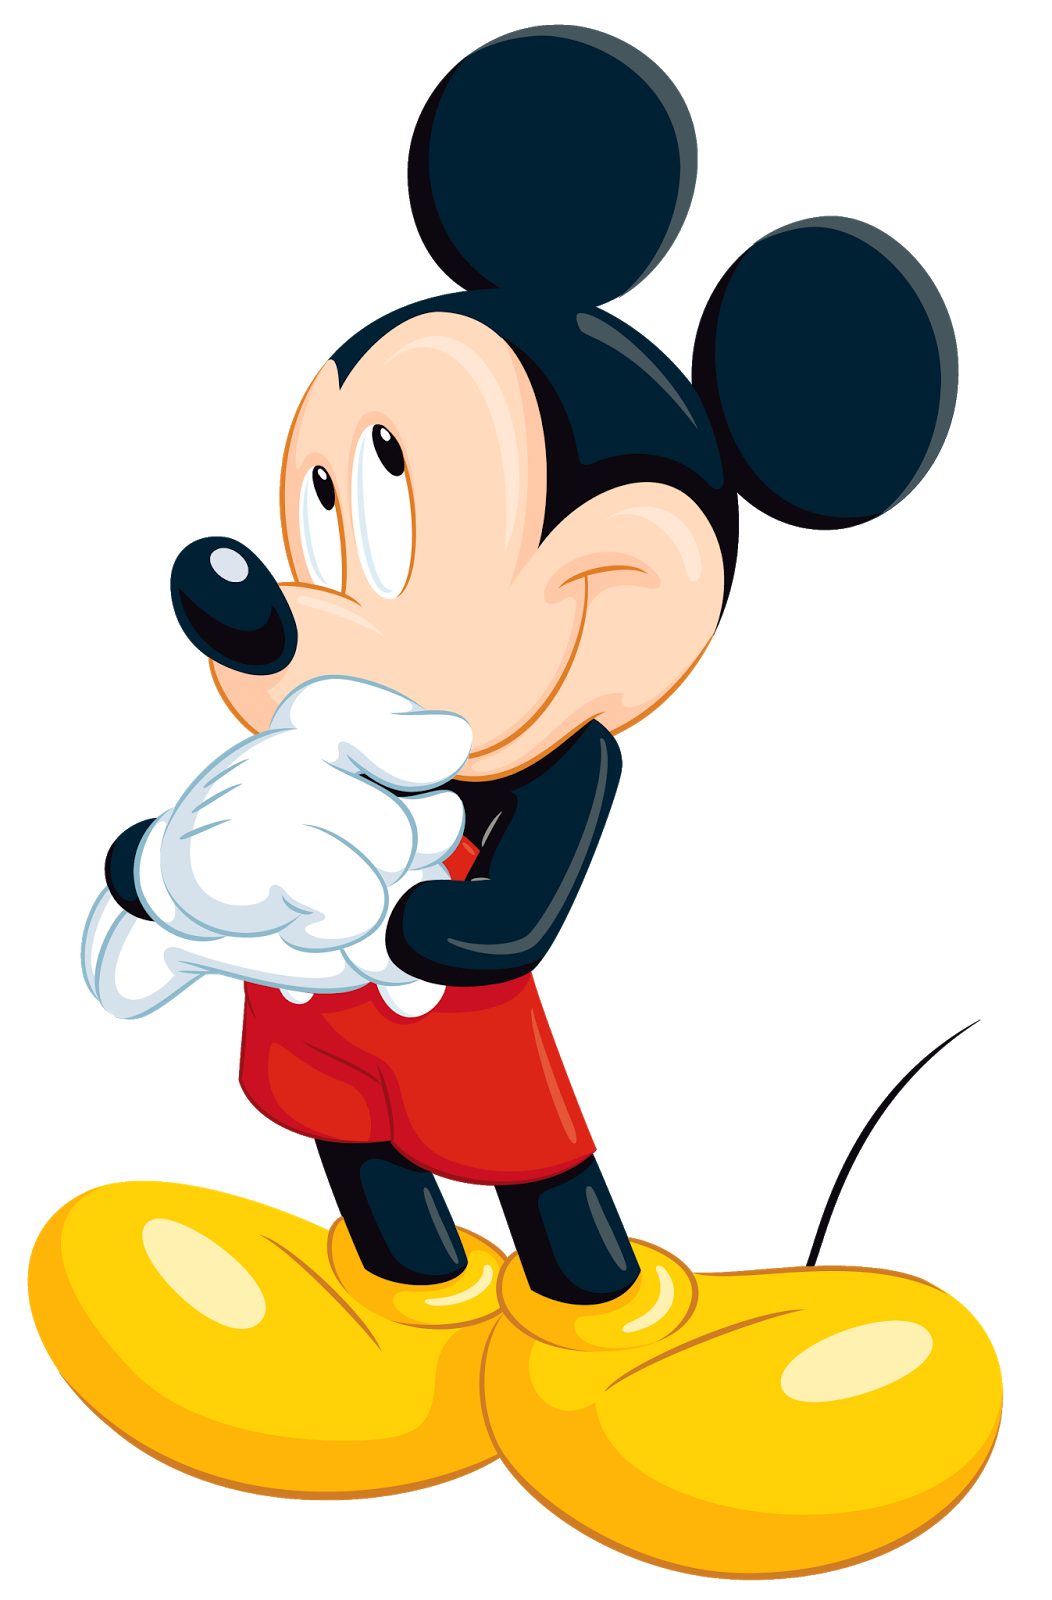 Disney Mickey Mouse PNG Image File